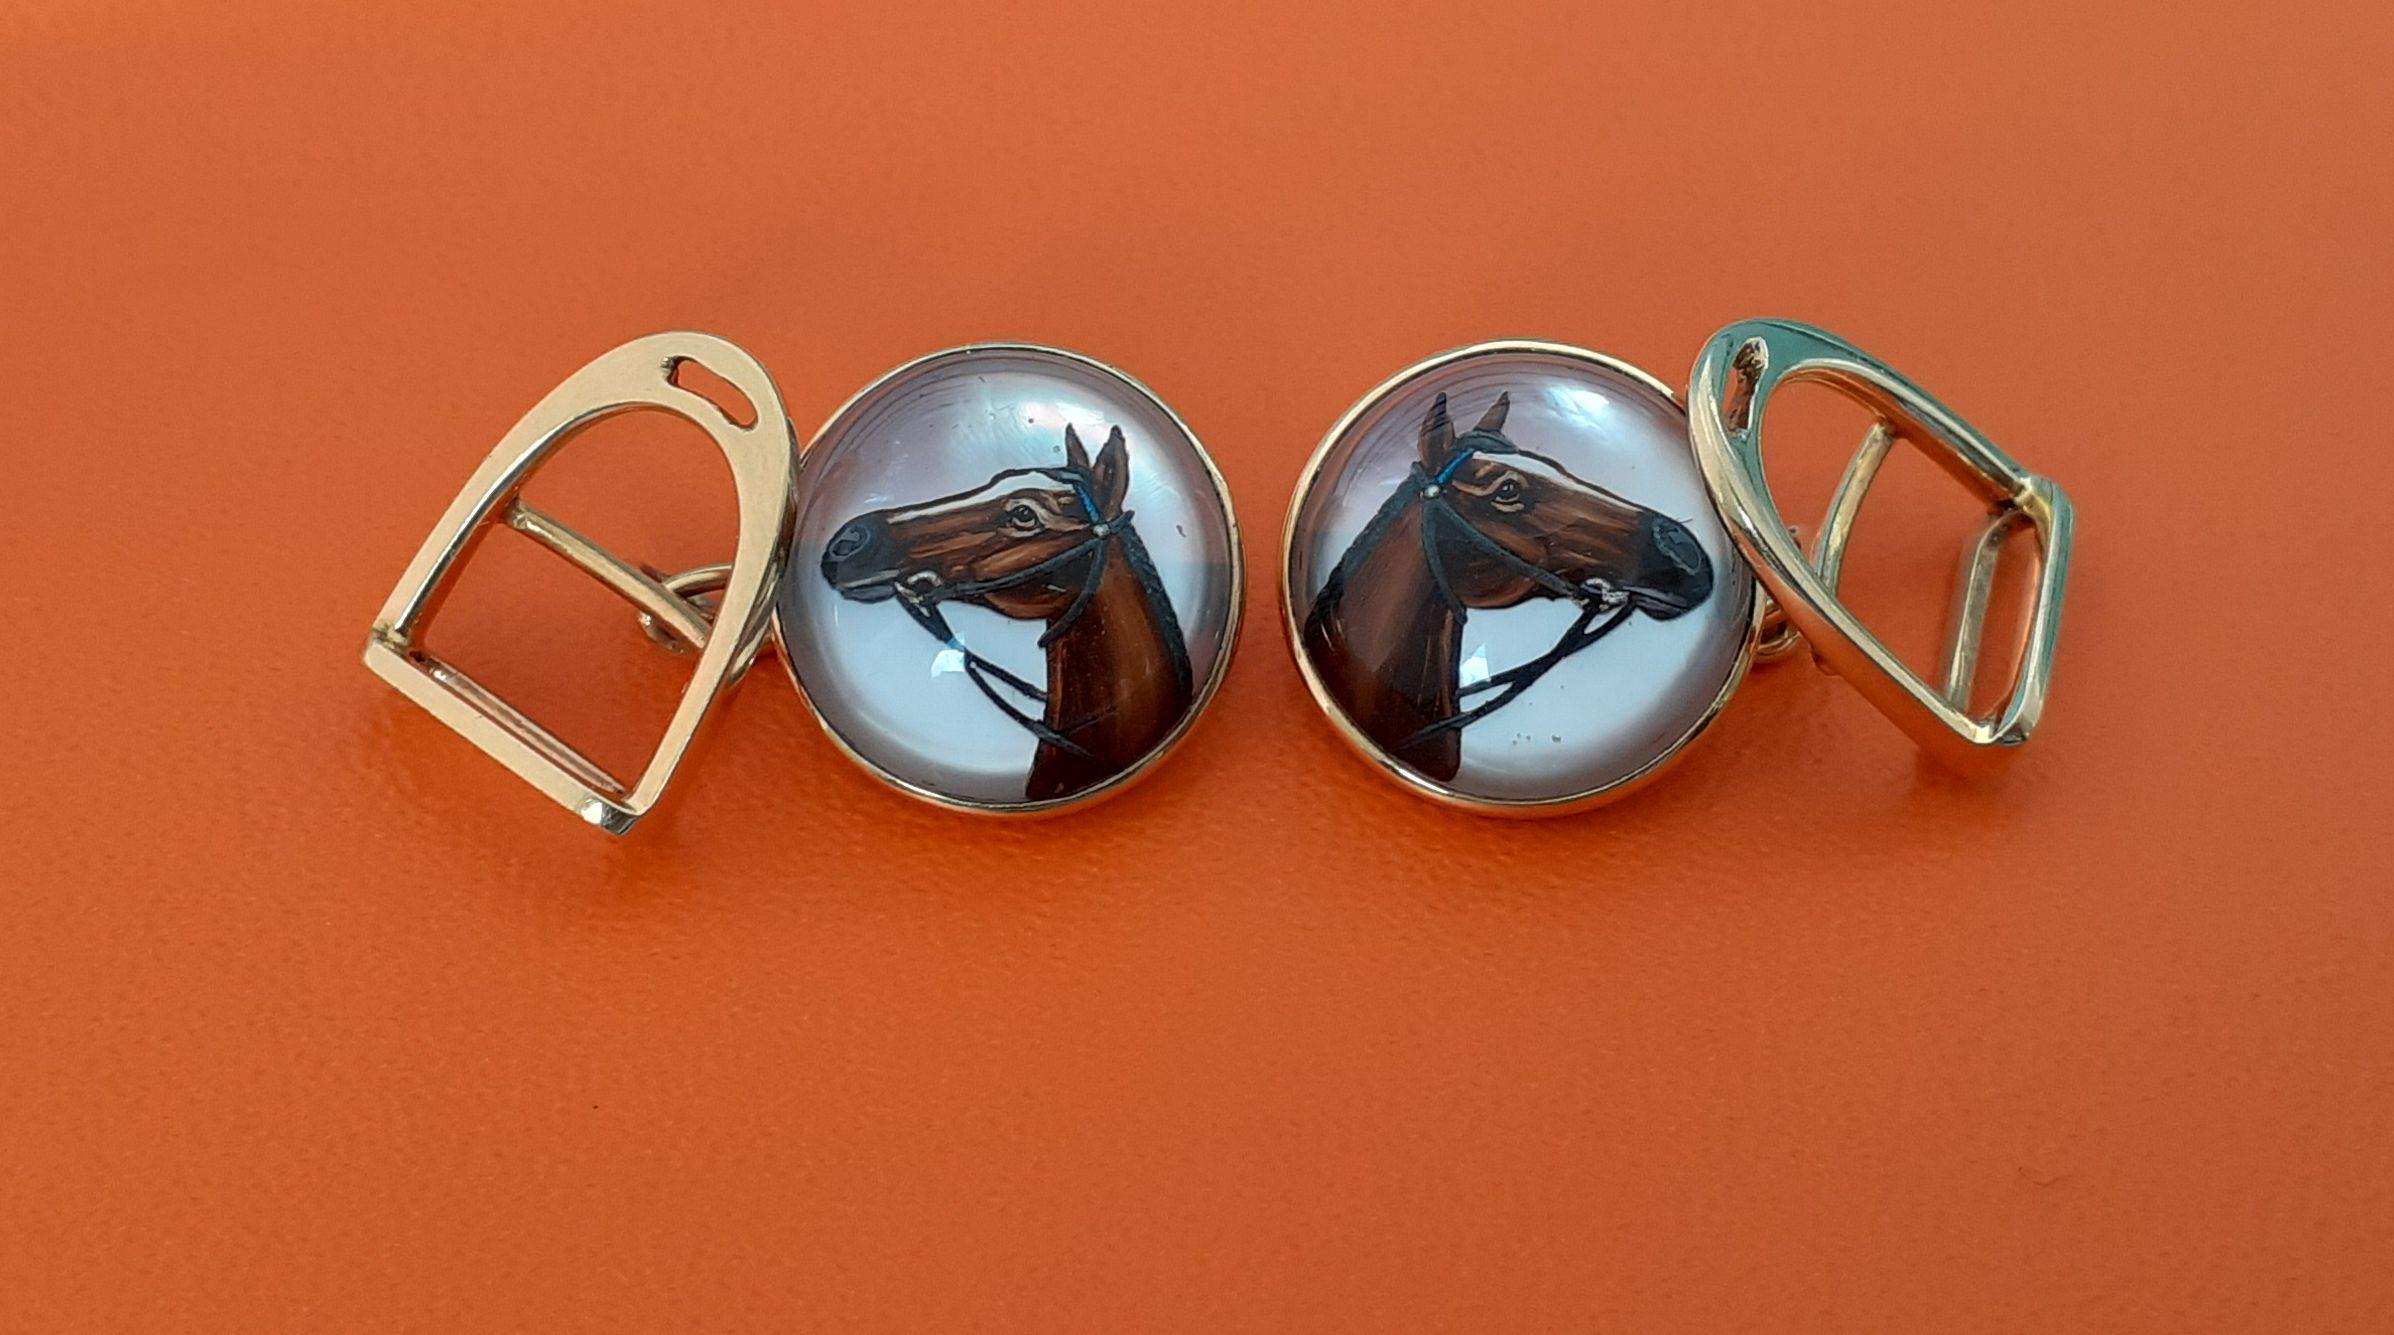 Astounding Gorgeous Authentic Hermès Cufflinks

Pattern: Horse Heads and Stirrup

The essex crystal adds volume to the design which appears in 3 Dimensions

Rare vintage items !

Made of Essex Crystal and Gold

The base of the buttons is in